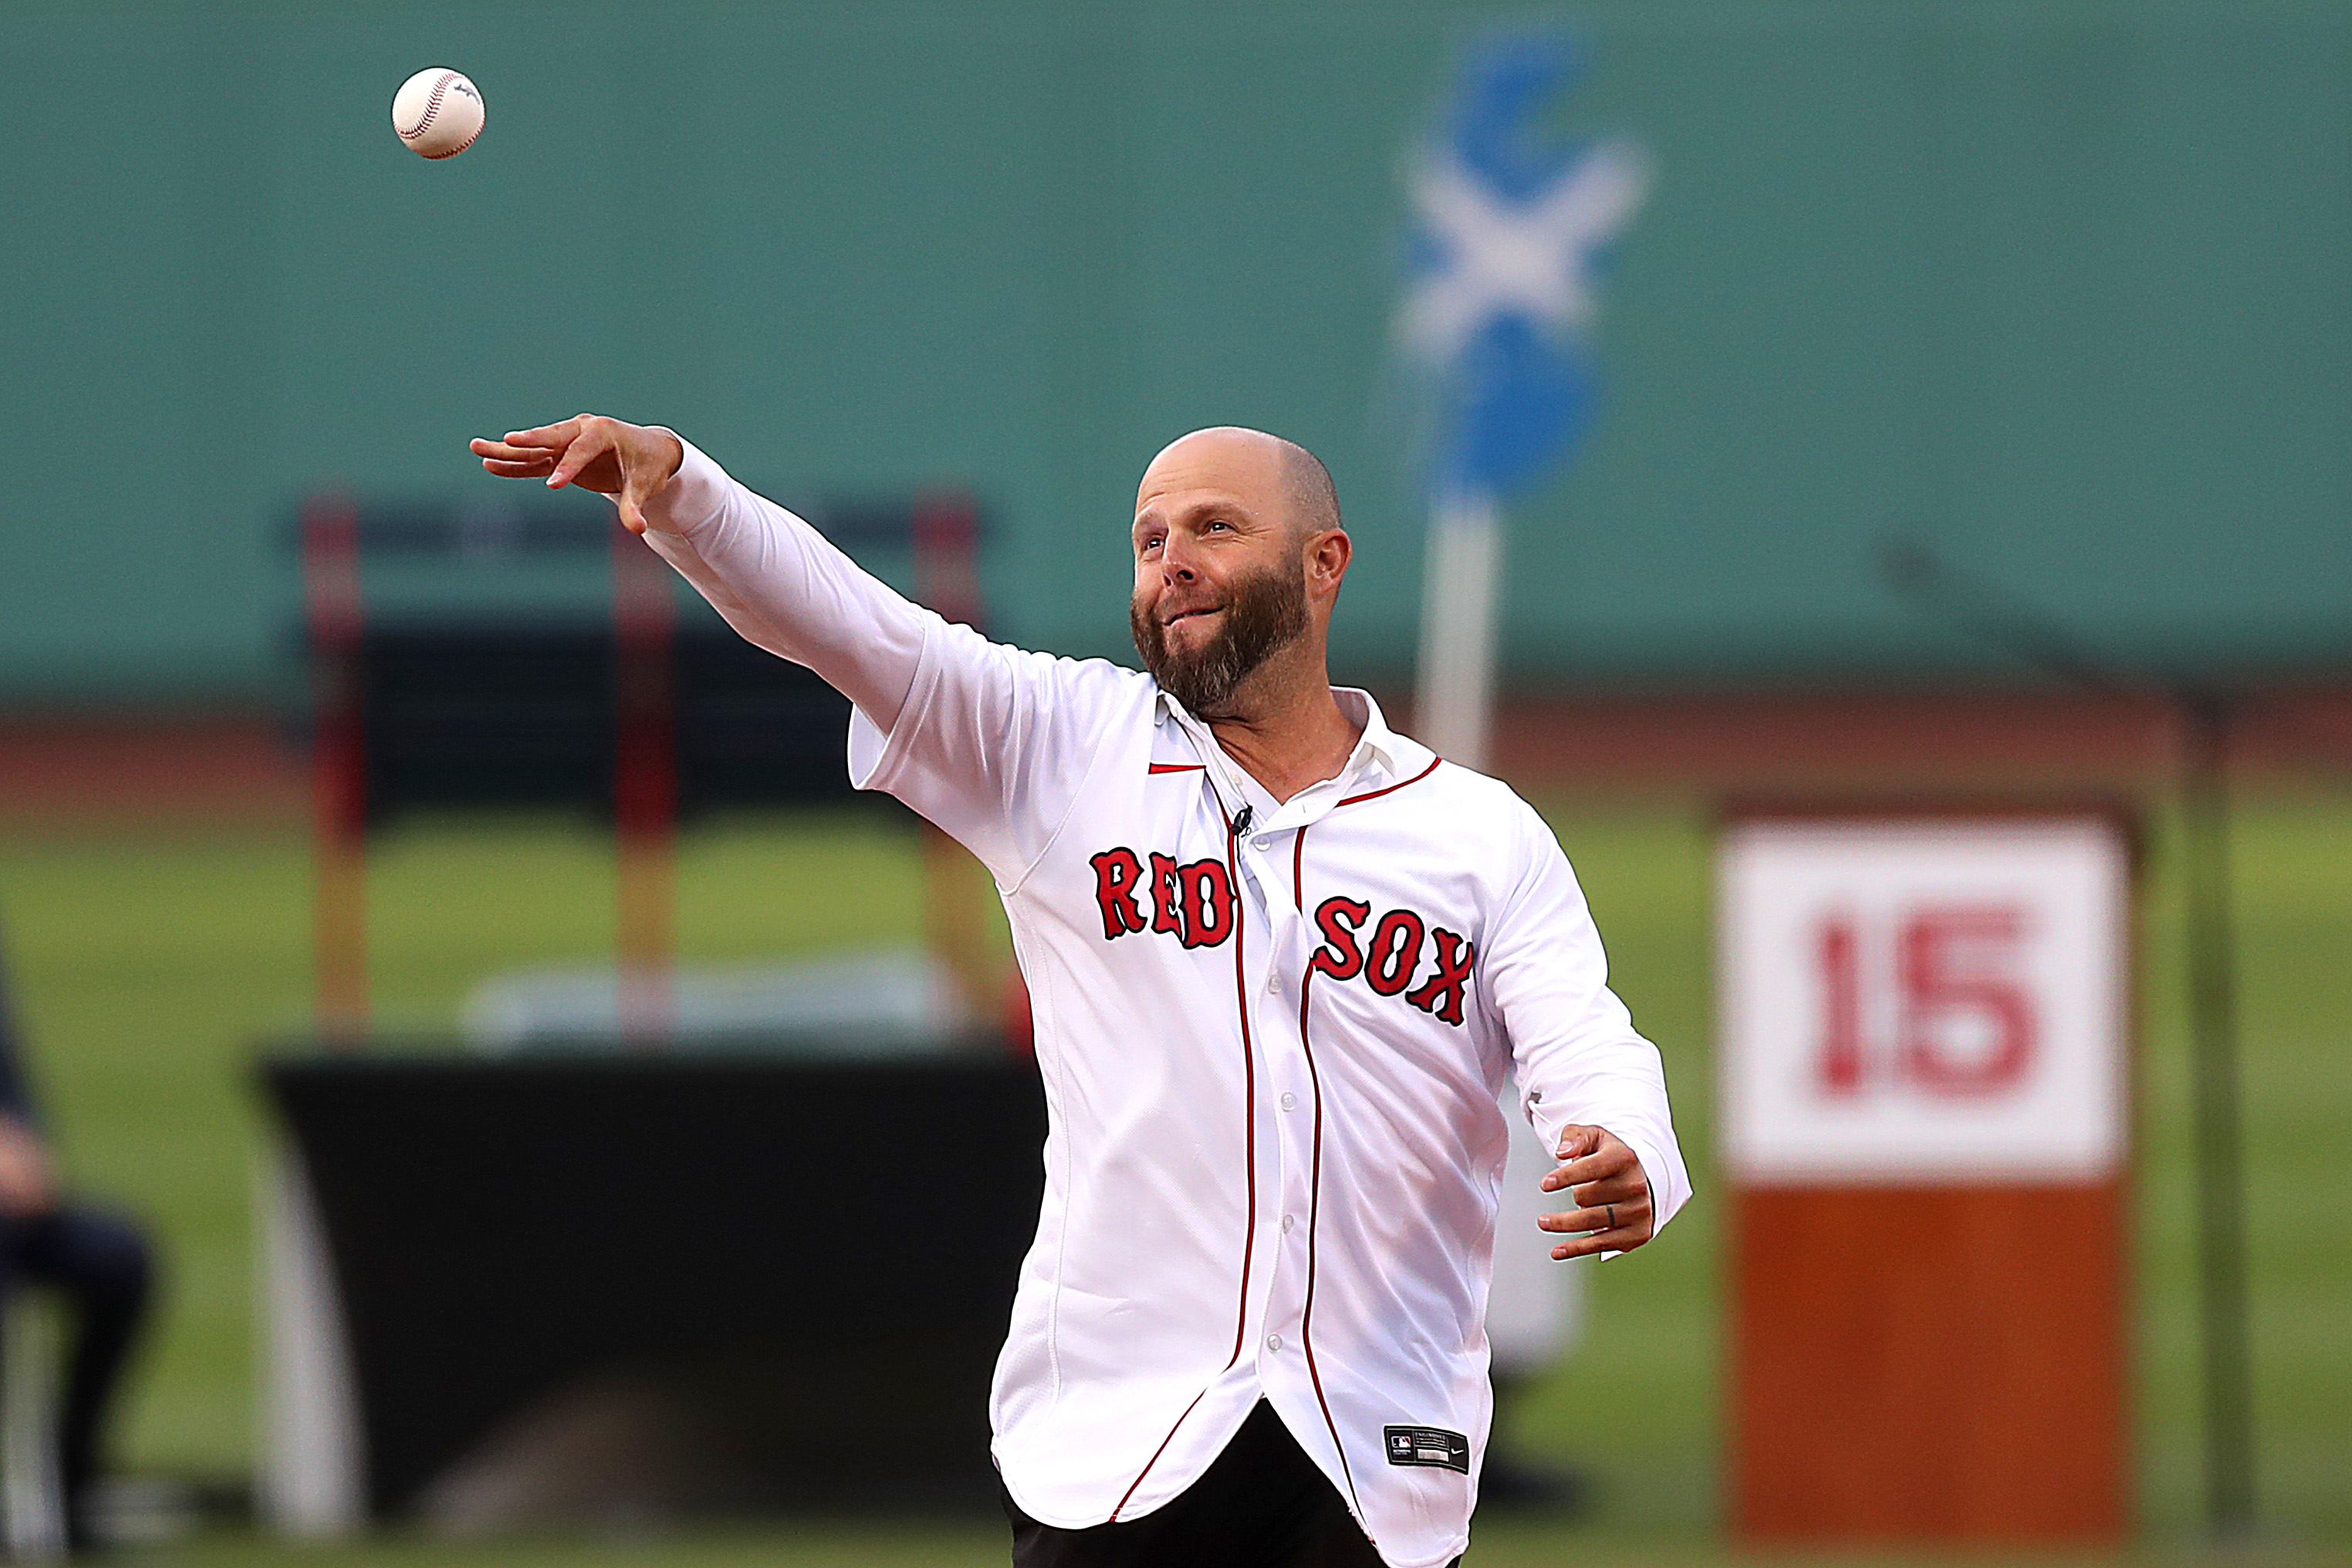 Star-spangled style: Red Sox player dons patriotic jacket for White House  visit